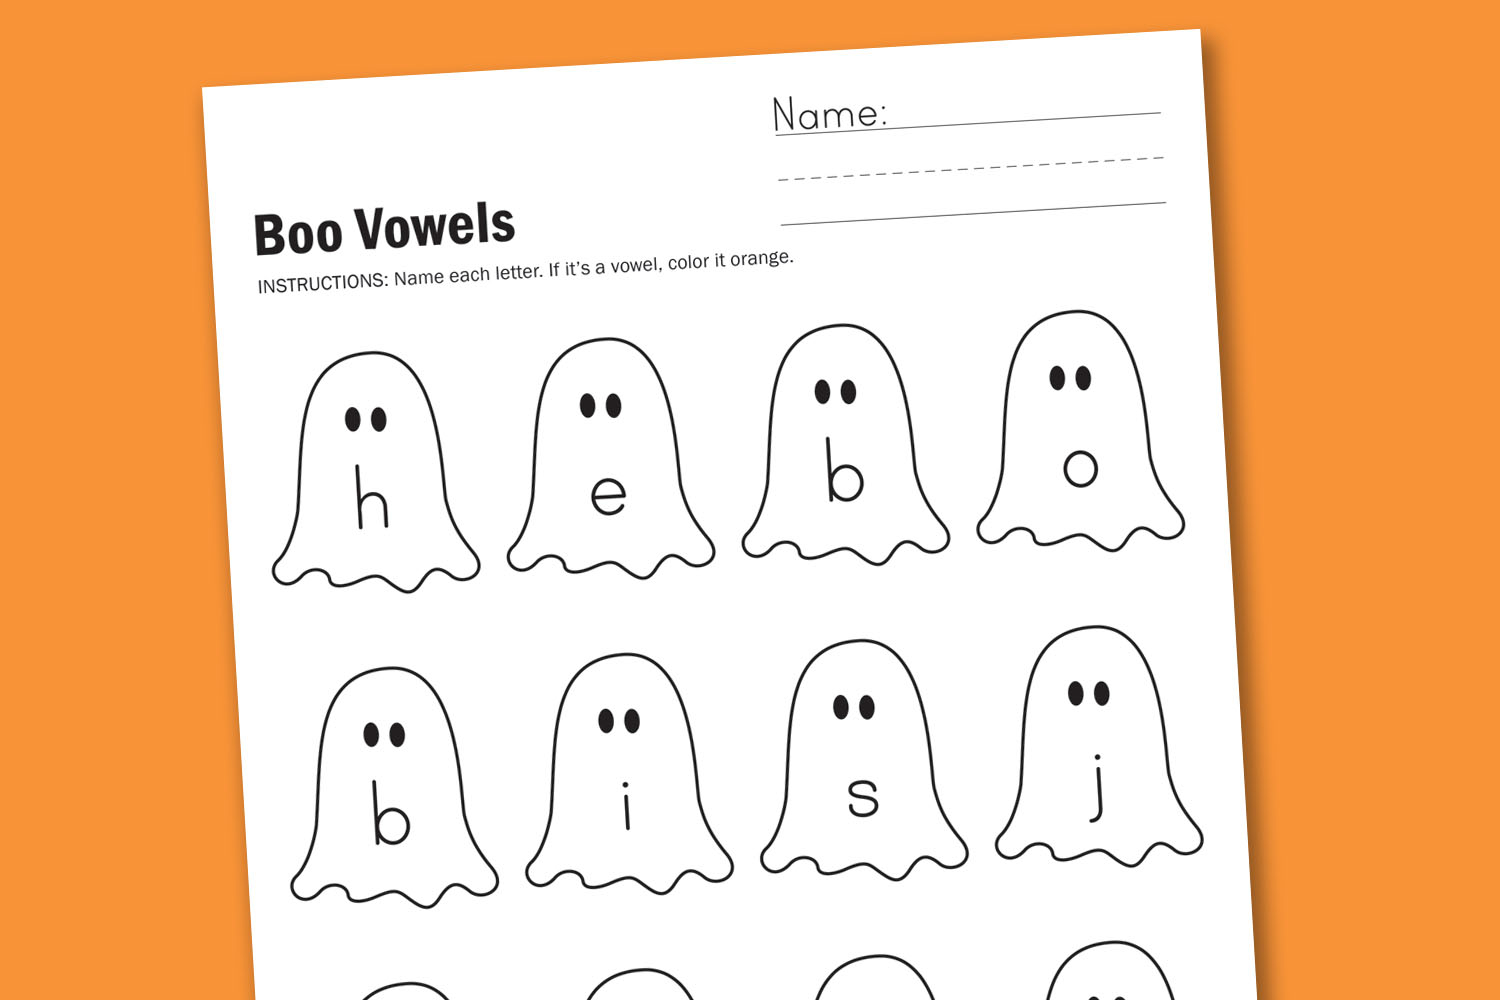 Worksheet Wednesday: Boo Vowels - Paging Supermom